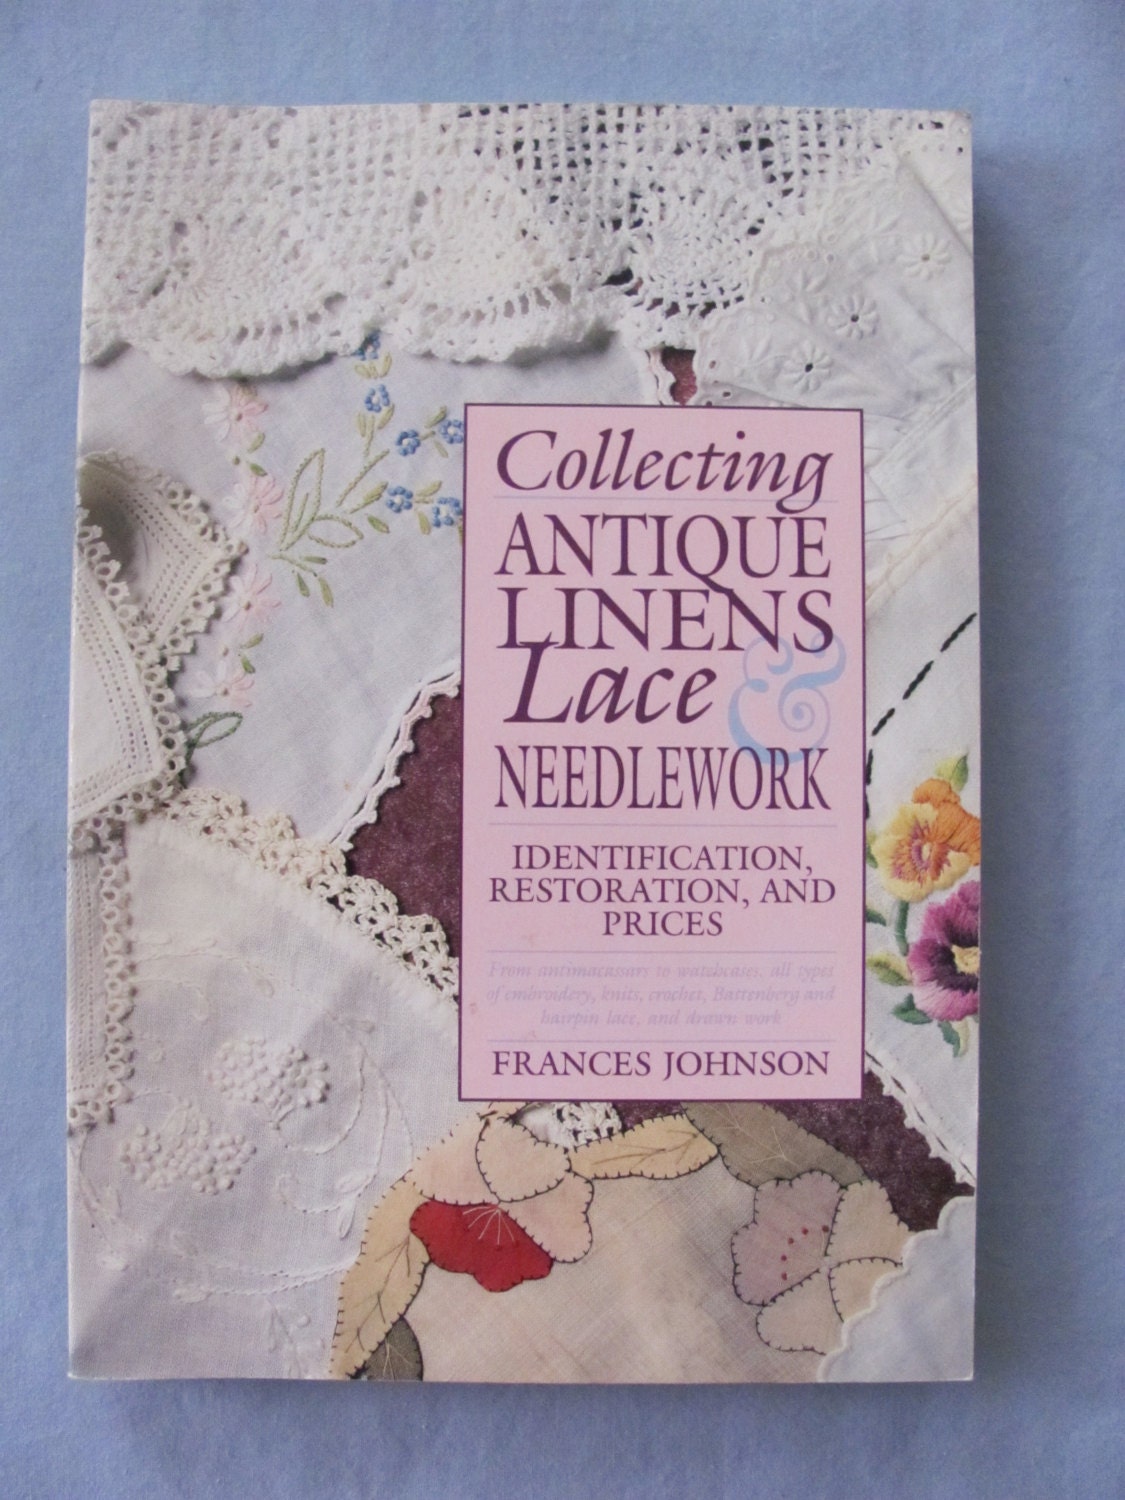 Collecting Antique Linens, Lace and Needlework, Identification, Restoration, and Prices Frances Johnson